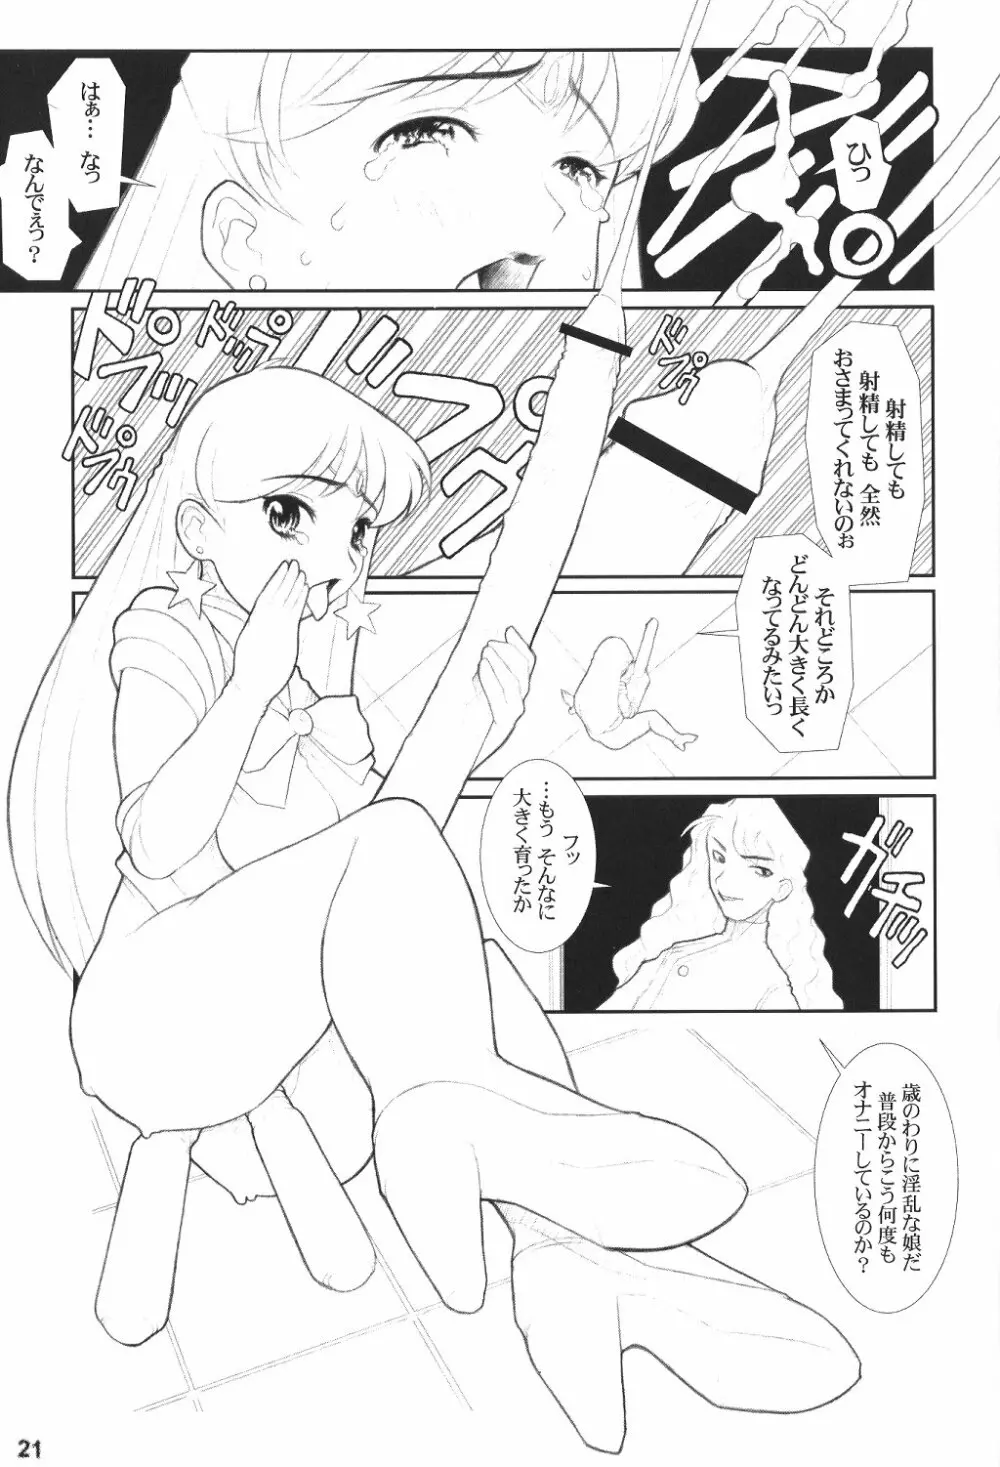 MaD ArtistS SailoR MooN Page.20